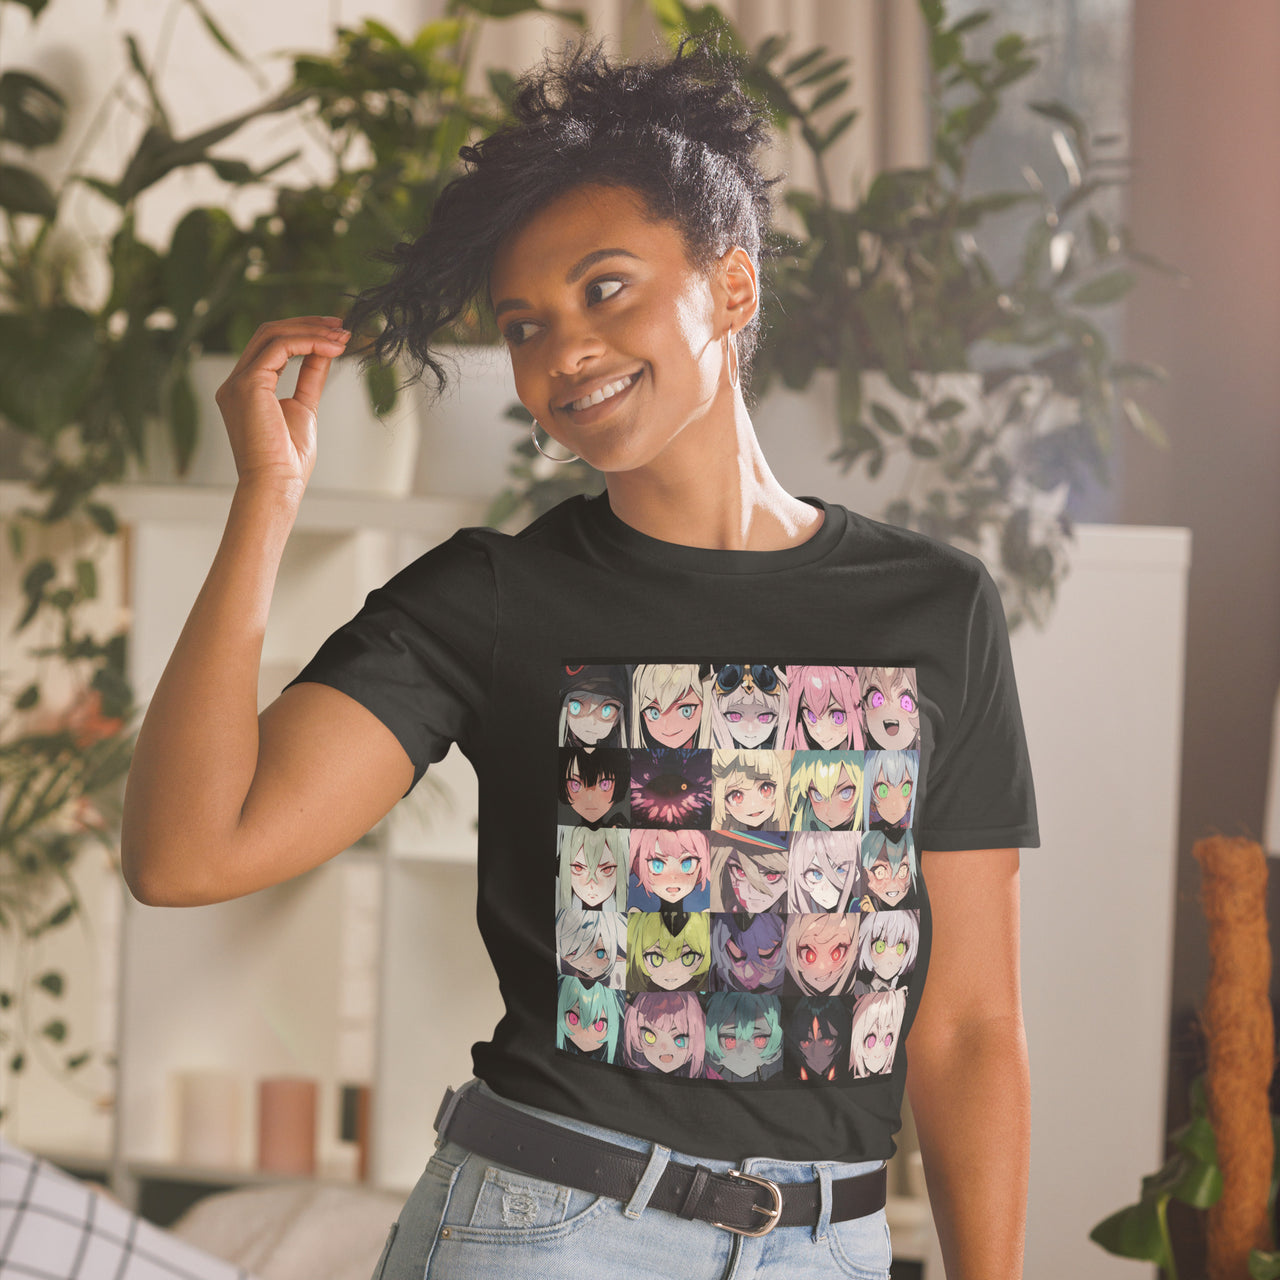 25 Expressive Anime Faces T-Shirt